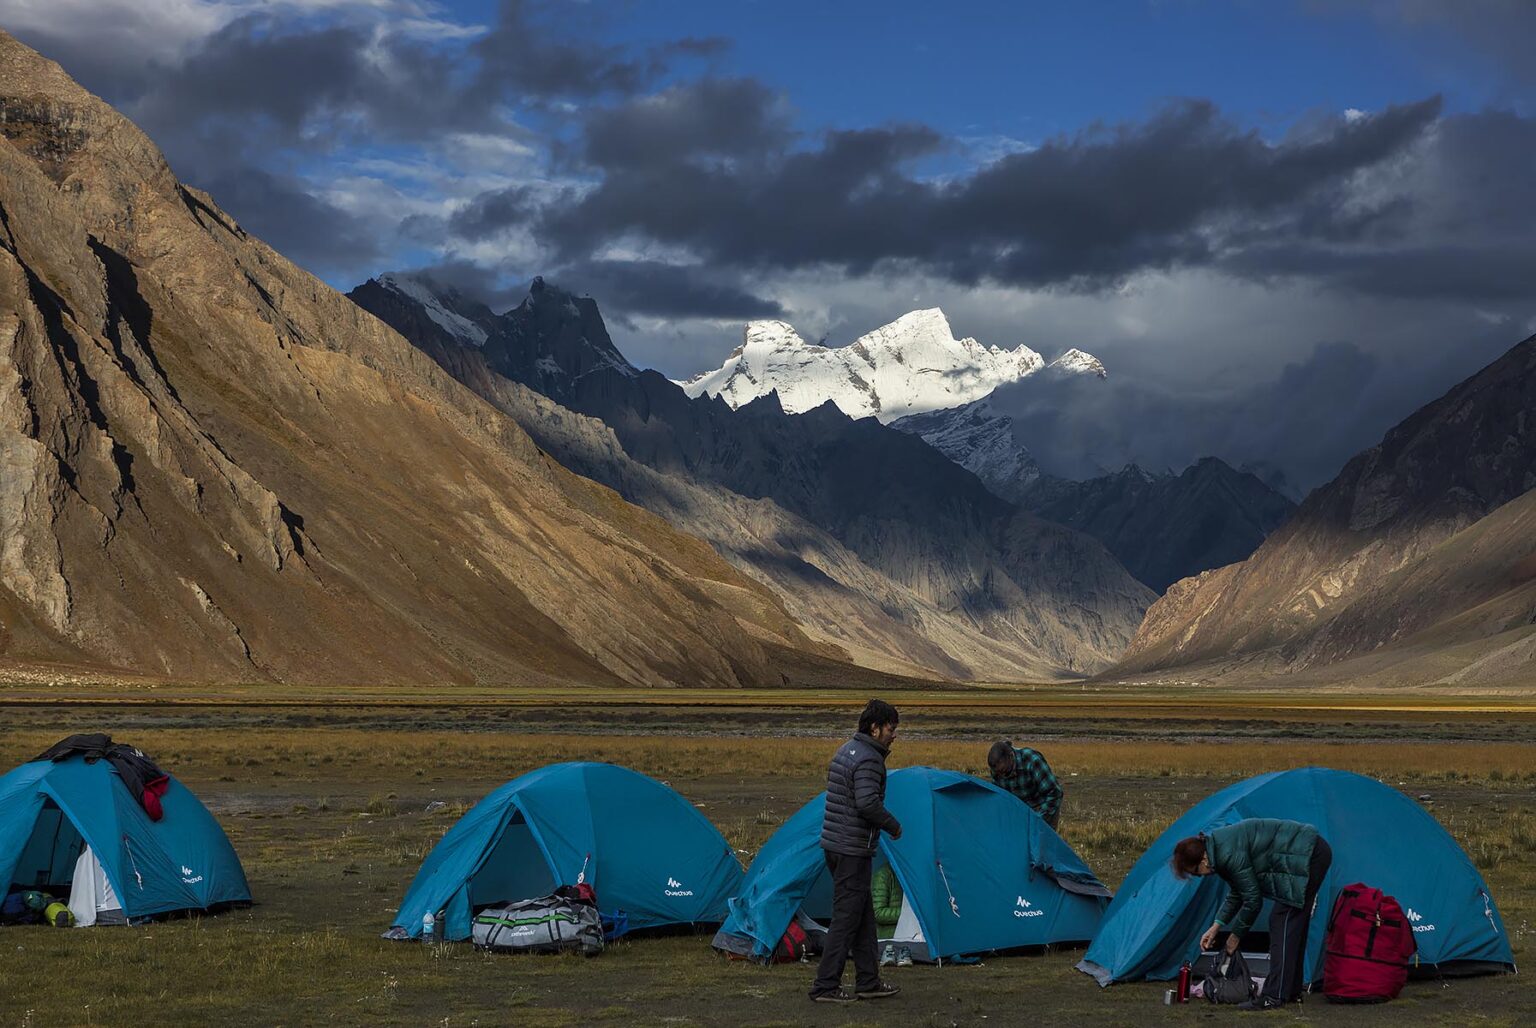 Camping below the massive himalayan peaks of NUN and KUN which rise to are 23,409 feet - ZANSKAR, LADAKH, INDIA